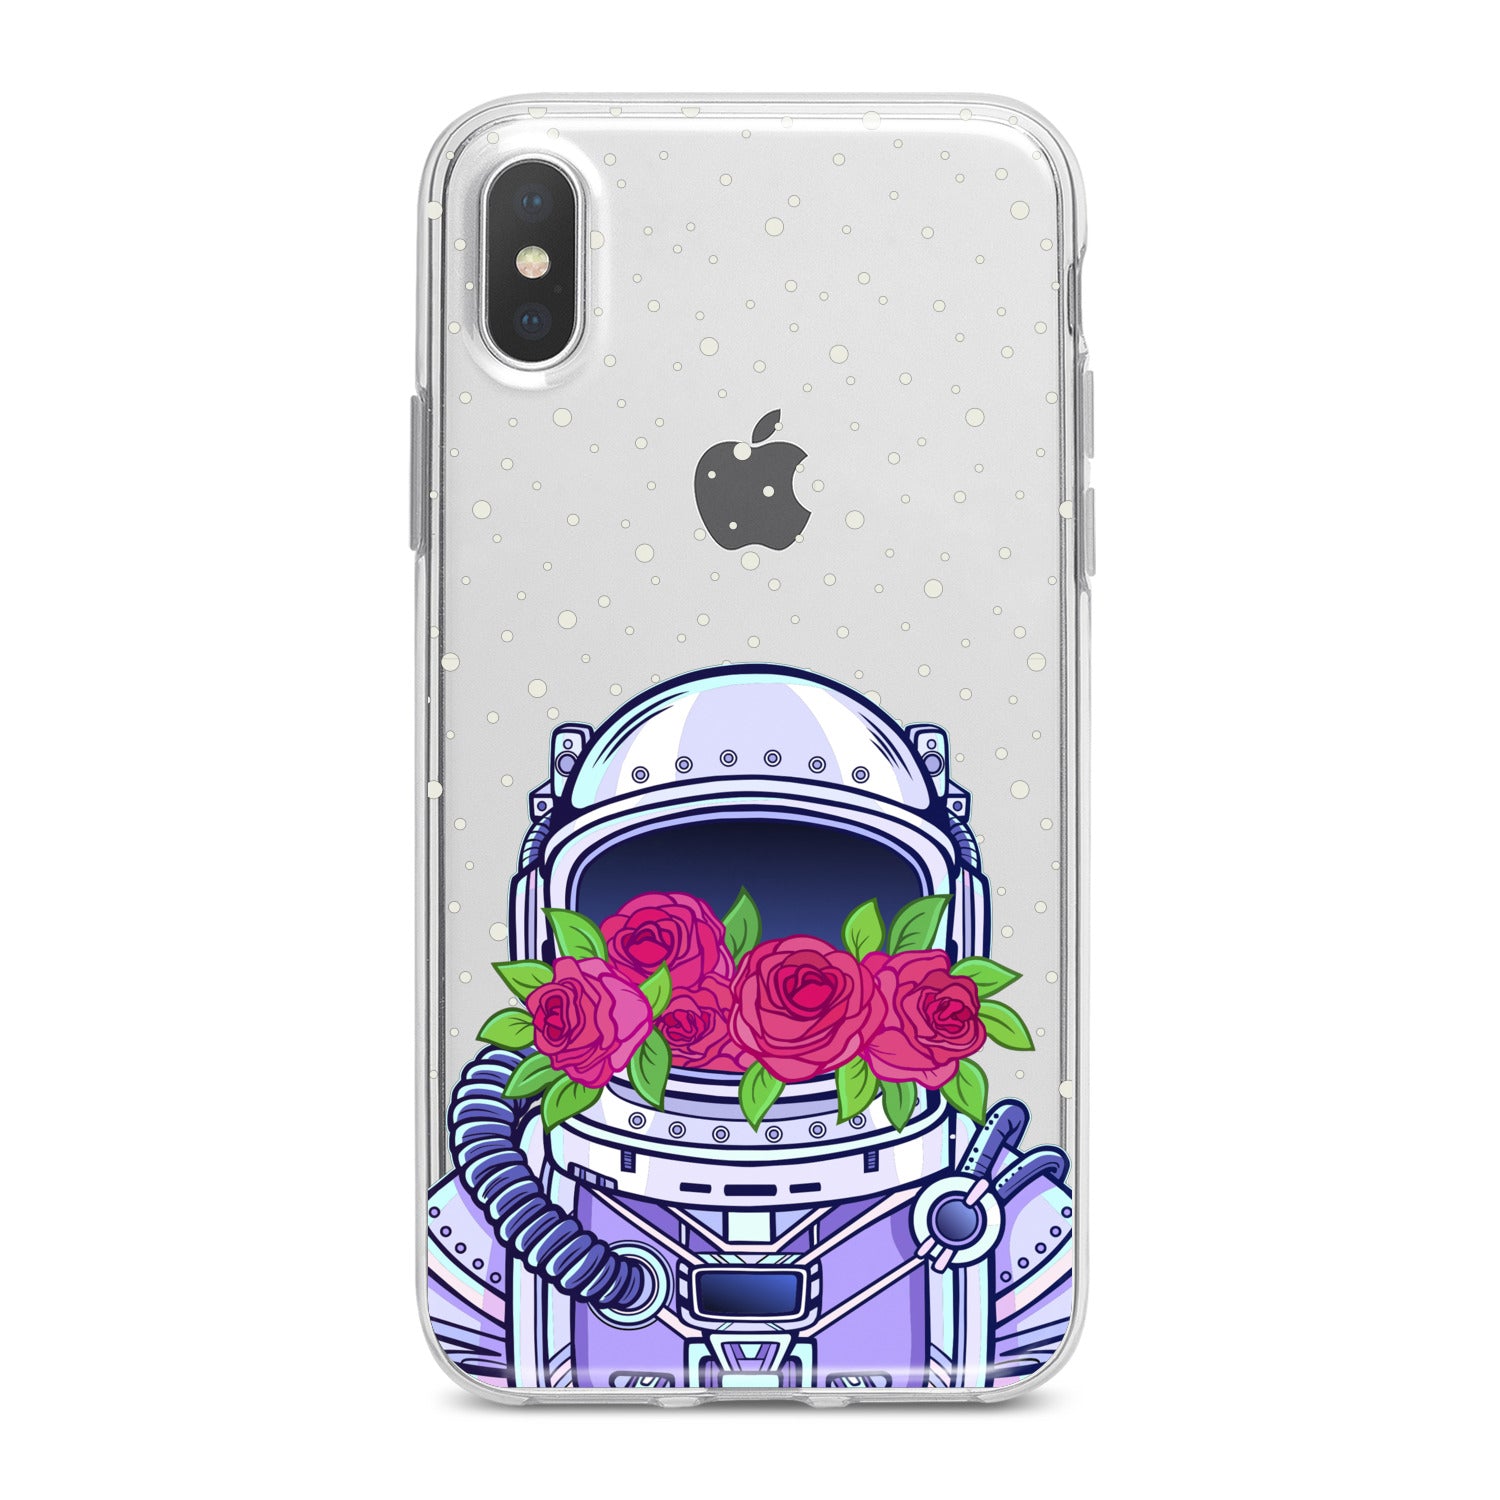 Lex Altern Floral Astronaut Phone Case for your iPhone & Android phone.